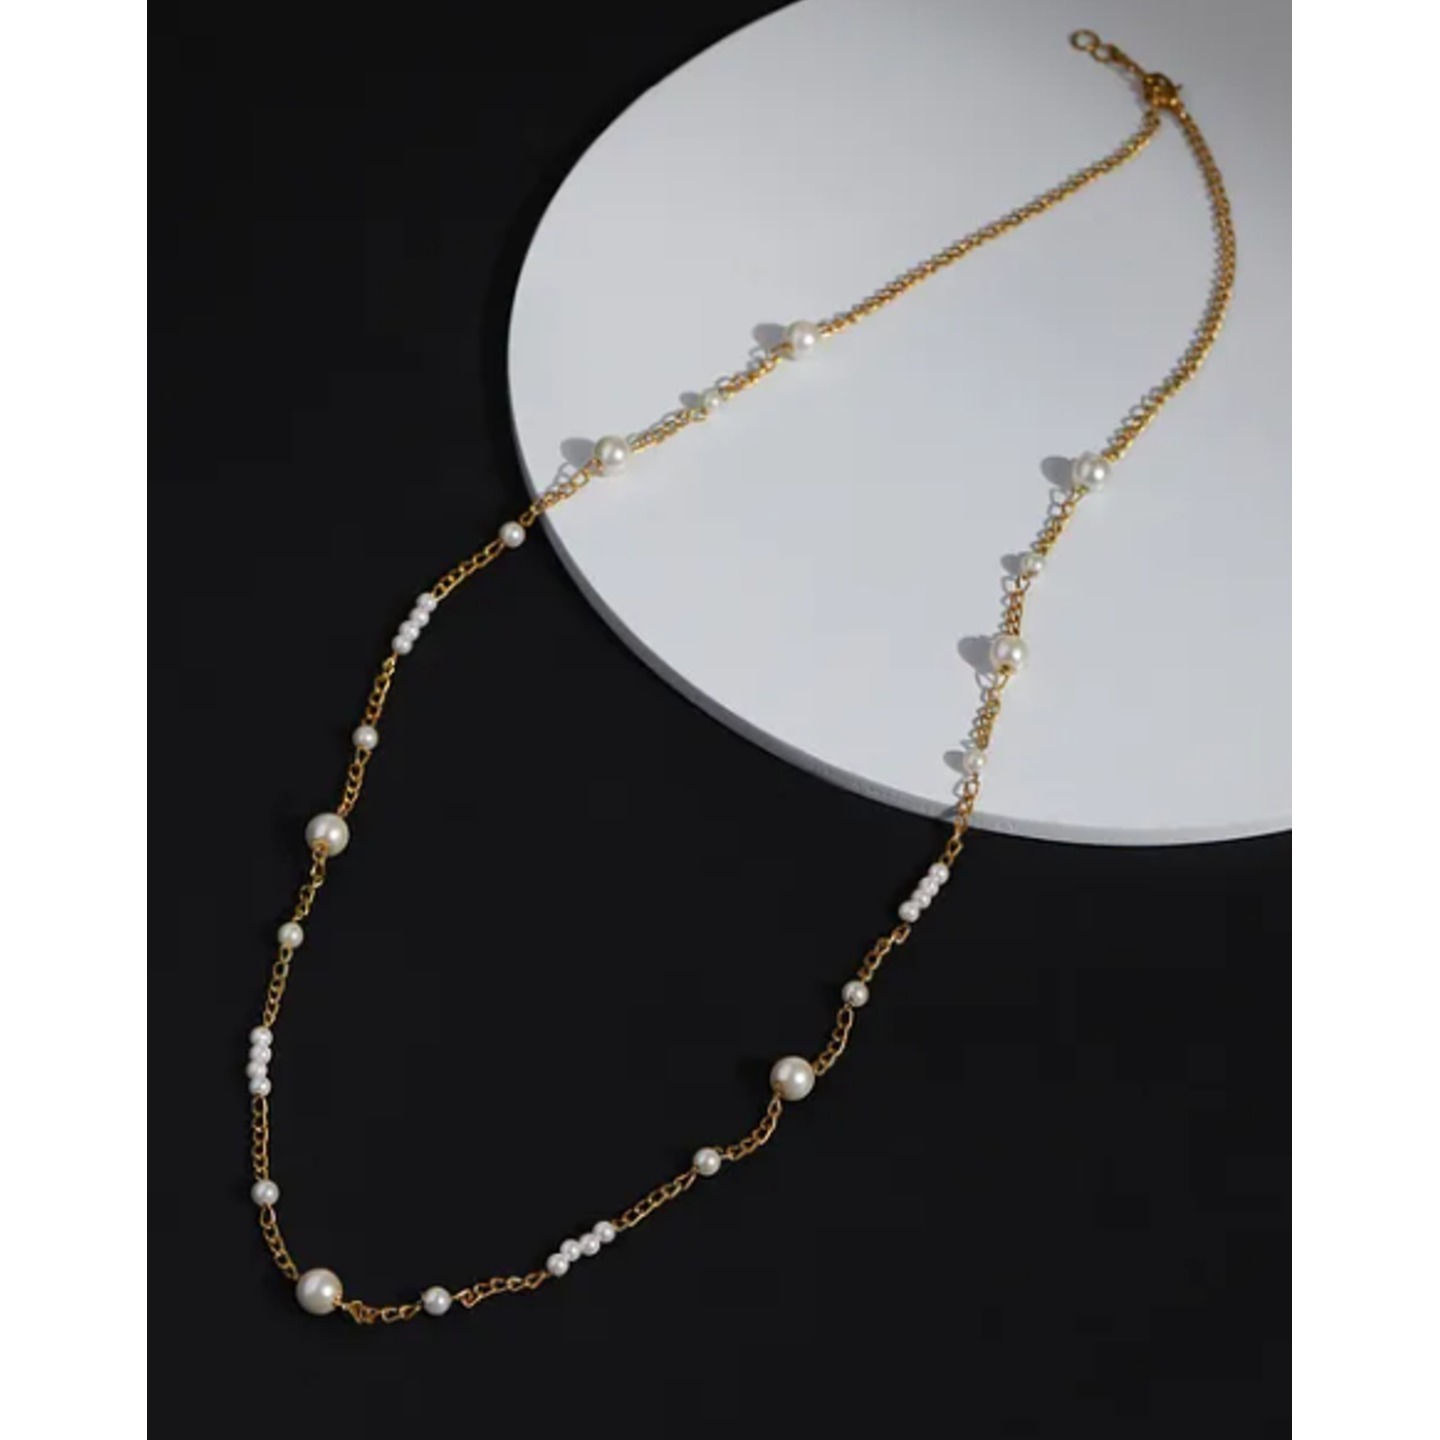 Gold Plated Handcrafted Necklace with Pearls